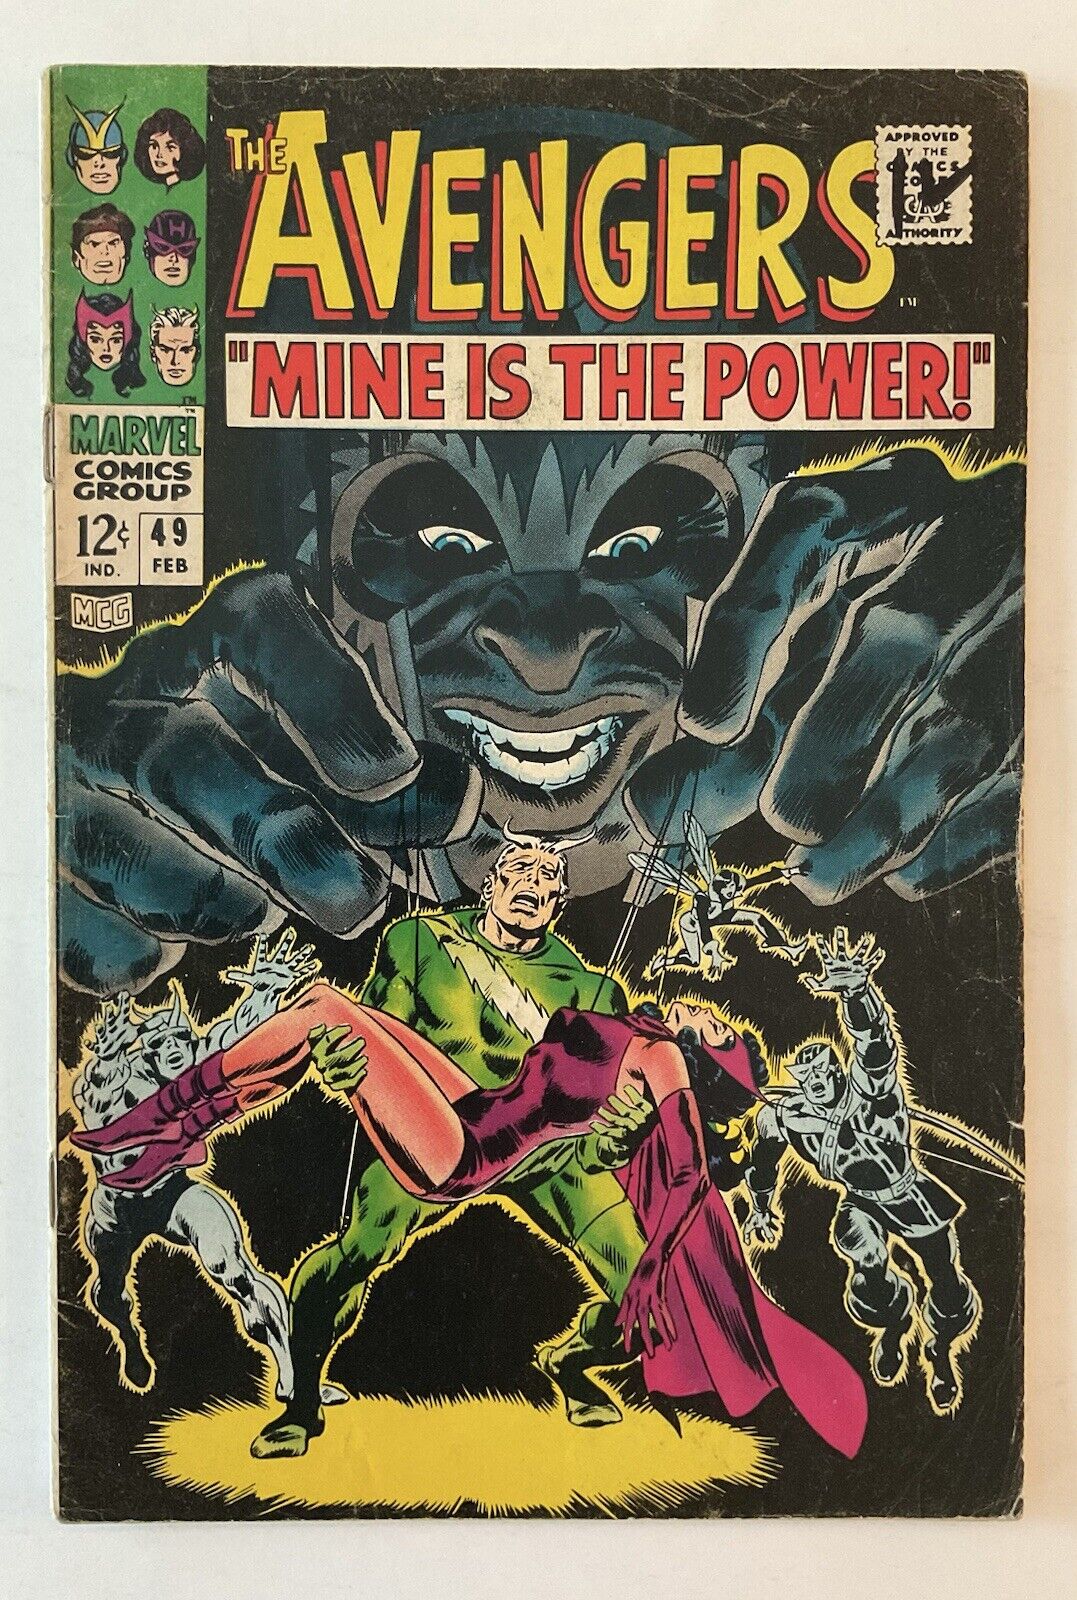 AVENGERS #49 1968 MARVEL SILVER AGE ~ VERY GOOD PLUS VG+